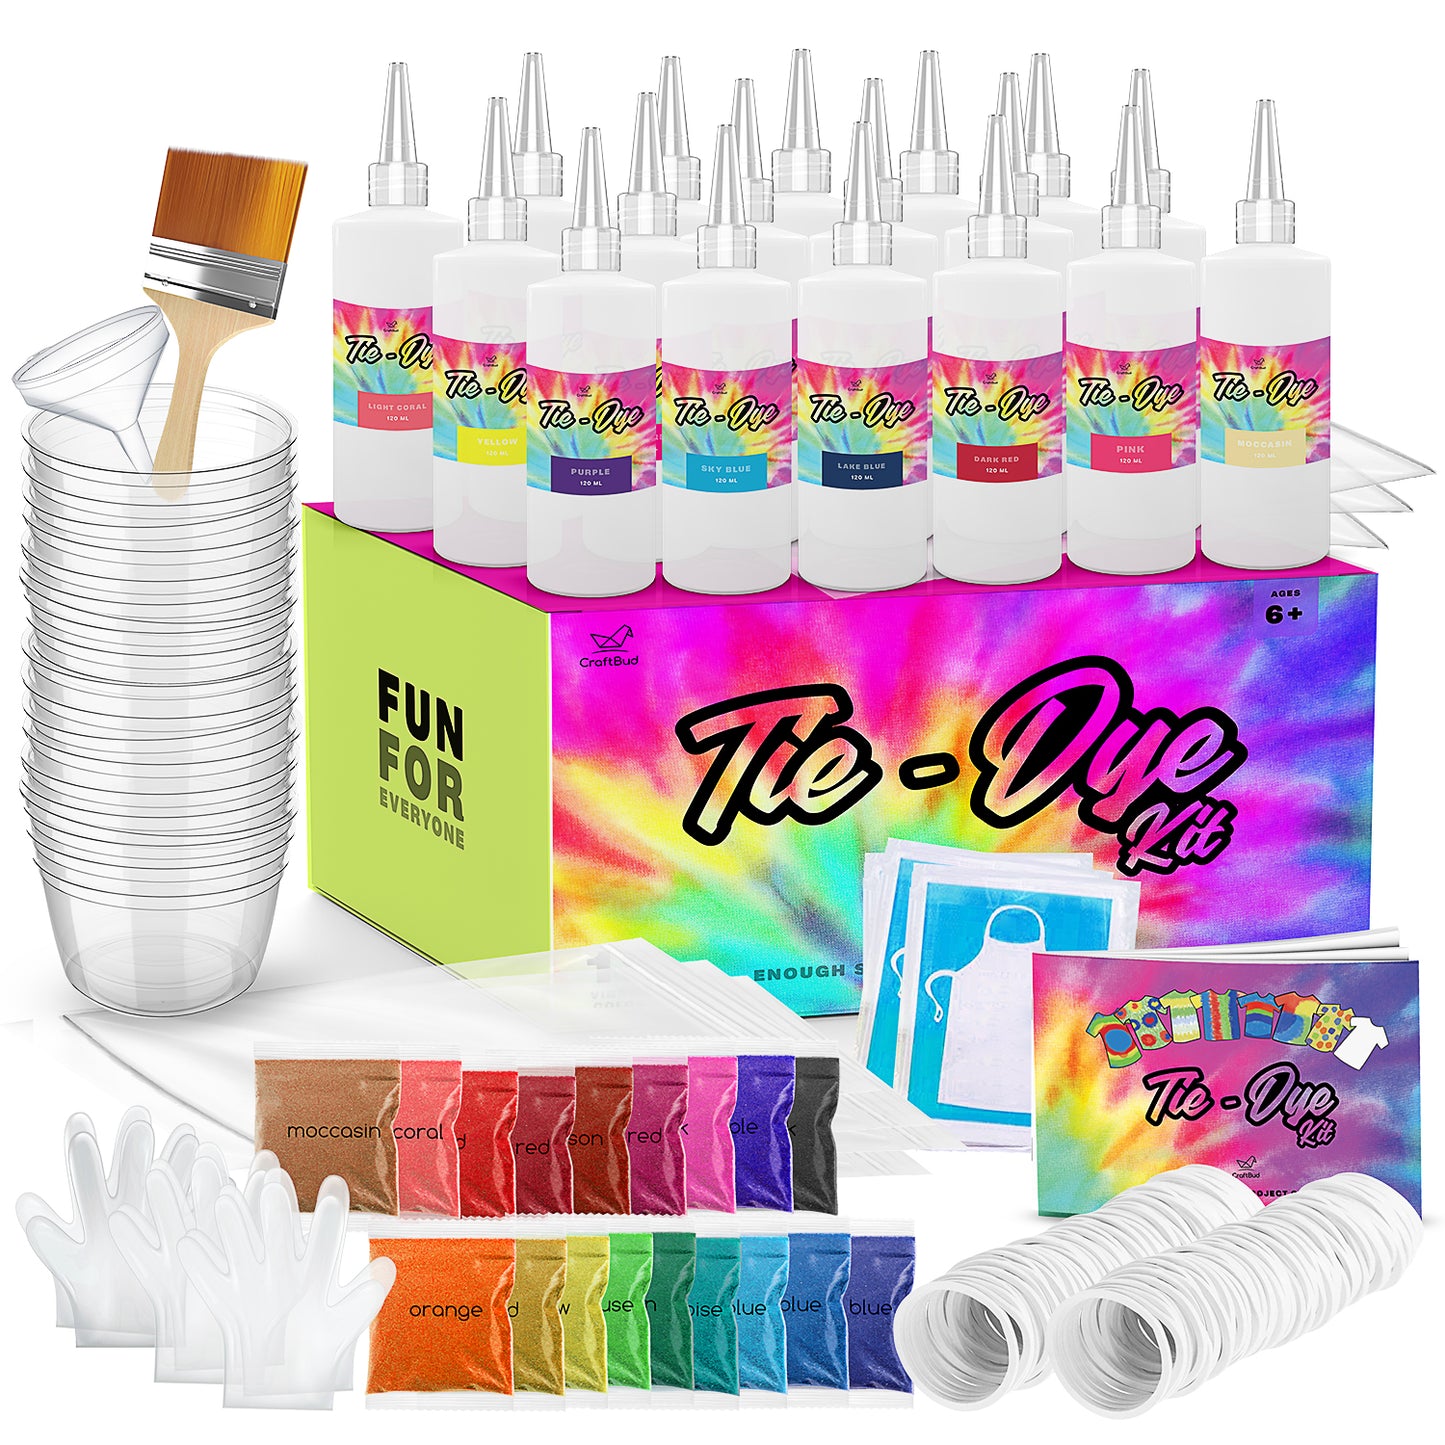  Tie Dye Kit for Kids Adults - Arts and Crafts Toy for Girls &  Boys Ages 6-12 - Fabric Tye Dye Craft Kits 20 Colors, Birthday Christmas  Gifts for Kids 3 4 5 6 7 8 9 10+